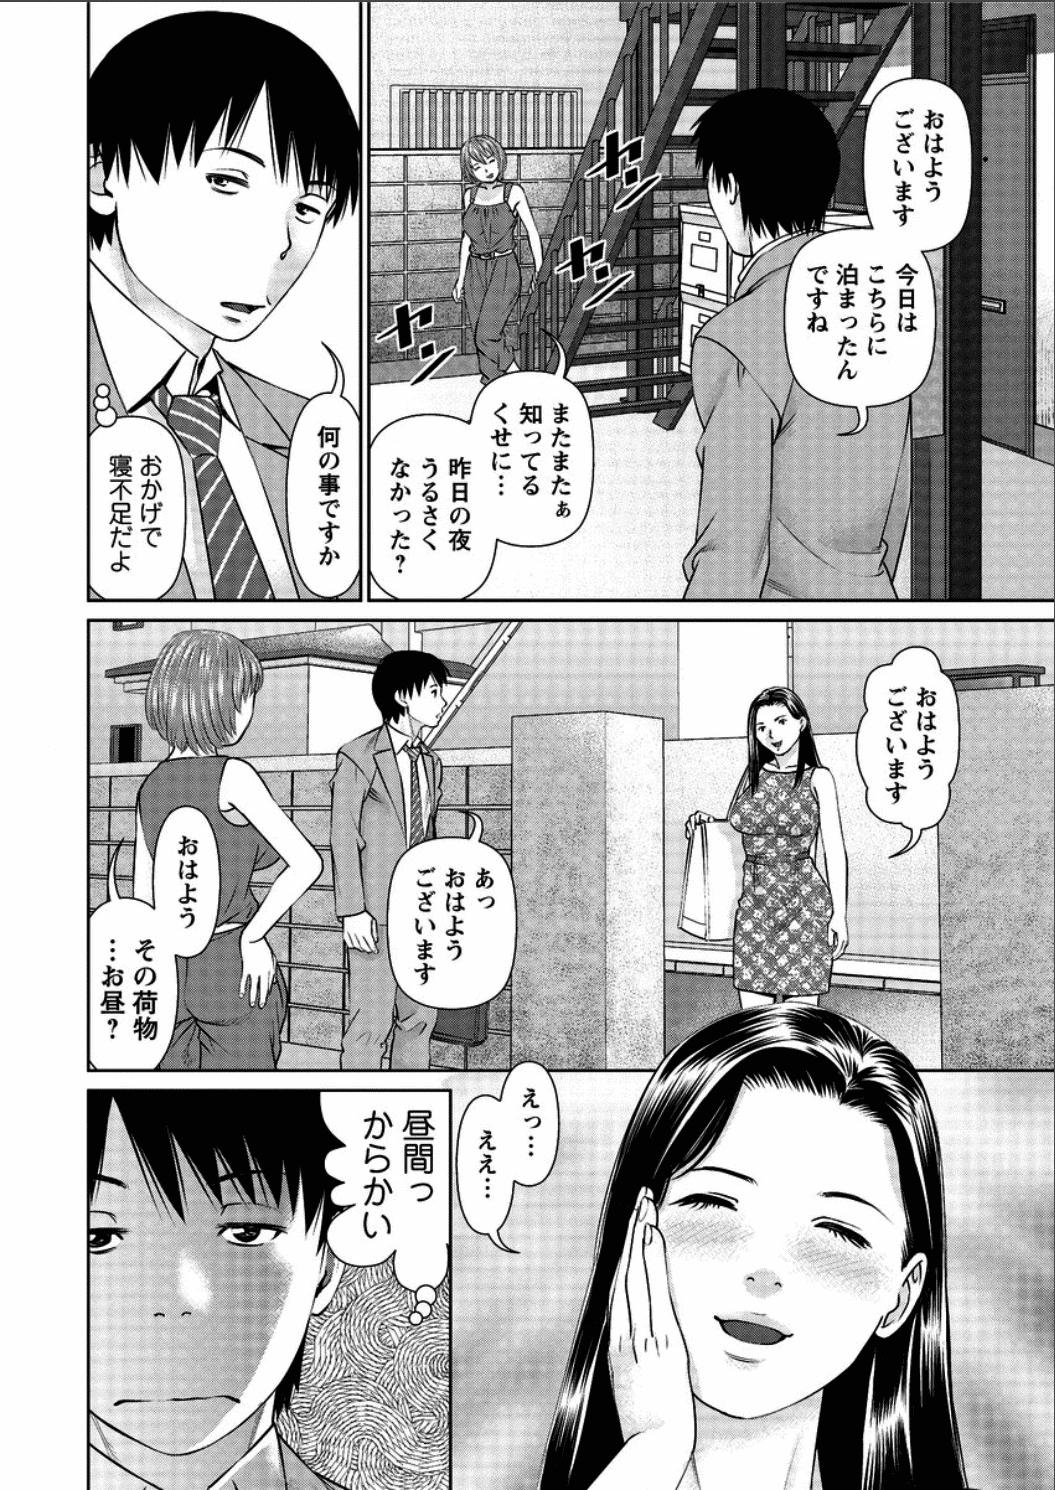 Role Play [Usi] Aijin Apart - Lover's Apartment Ch. 1-2 Gay Natural - Page 6